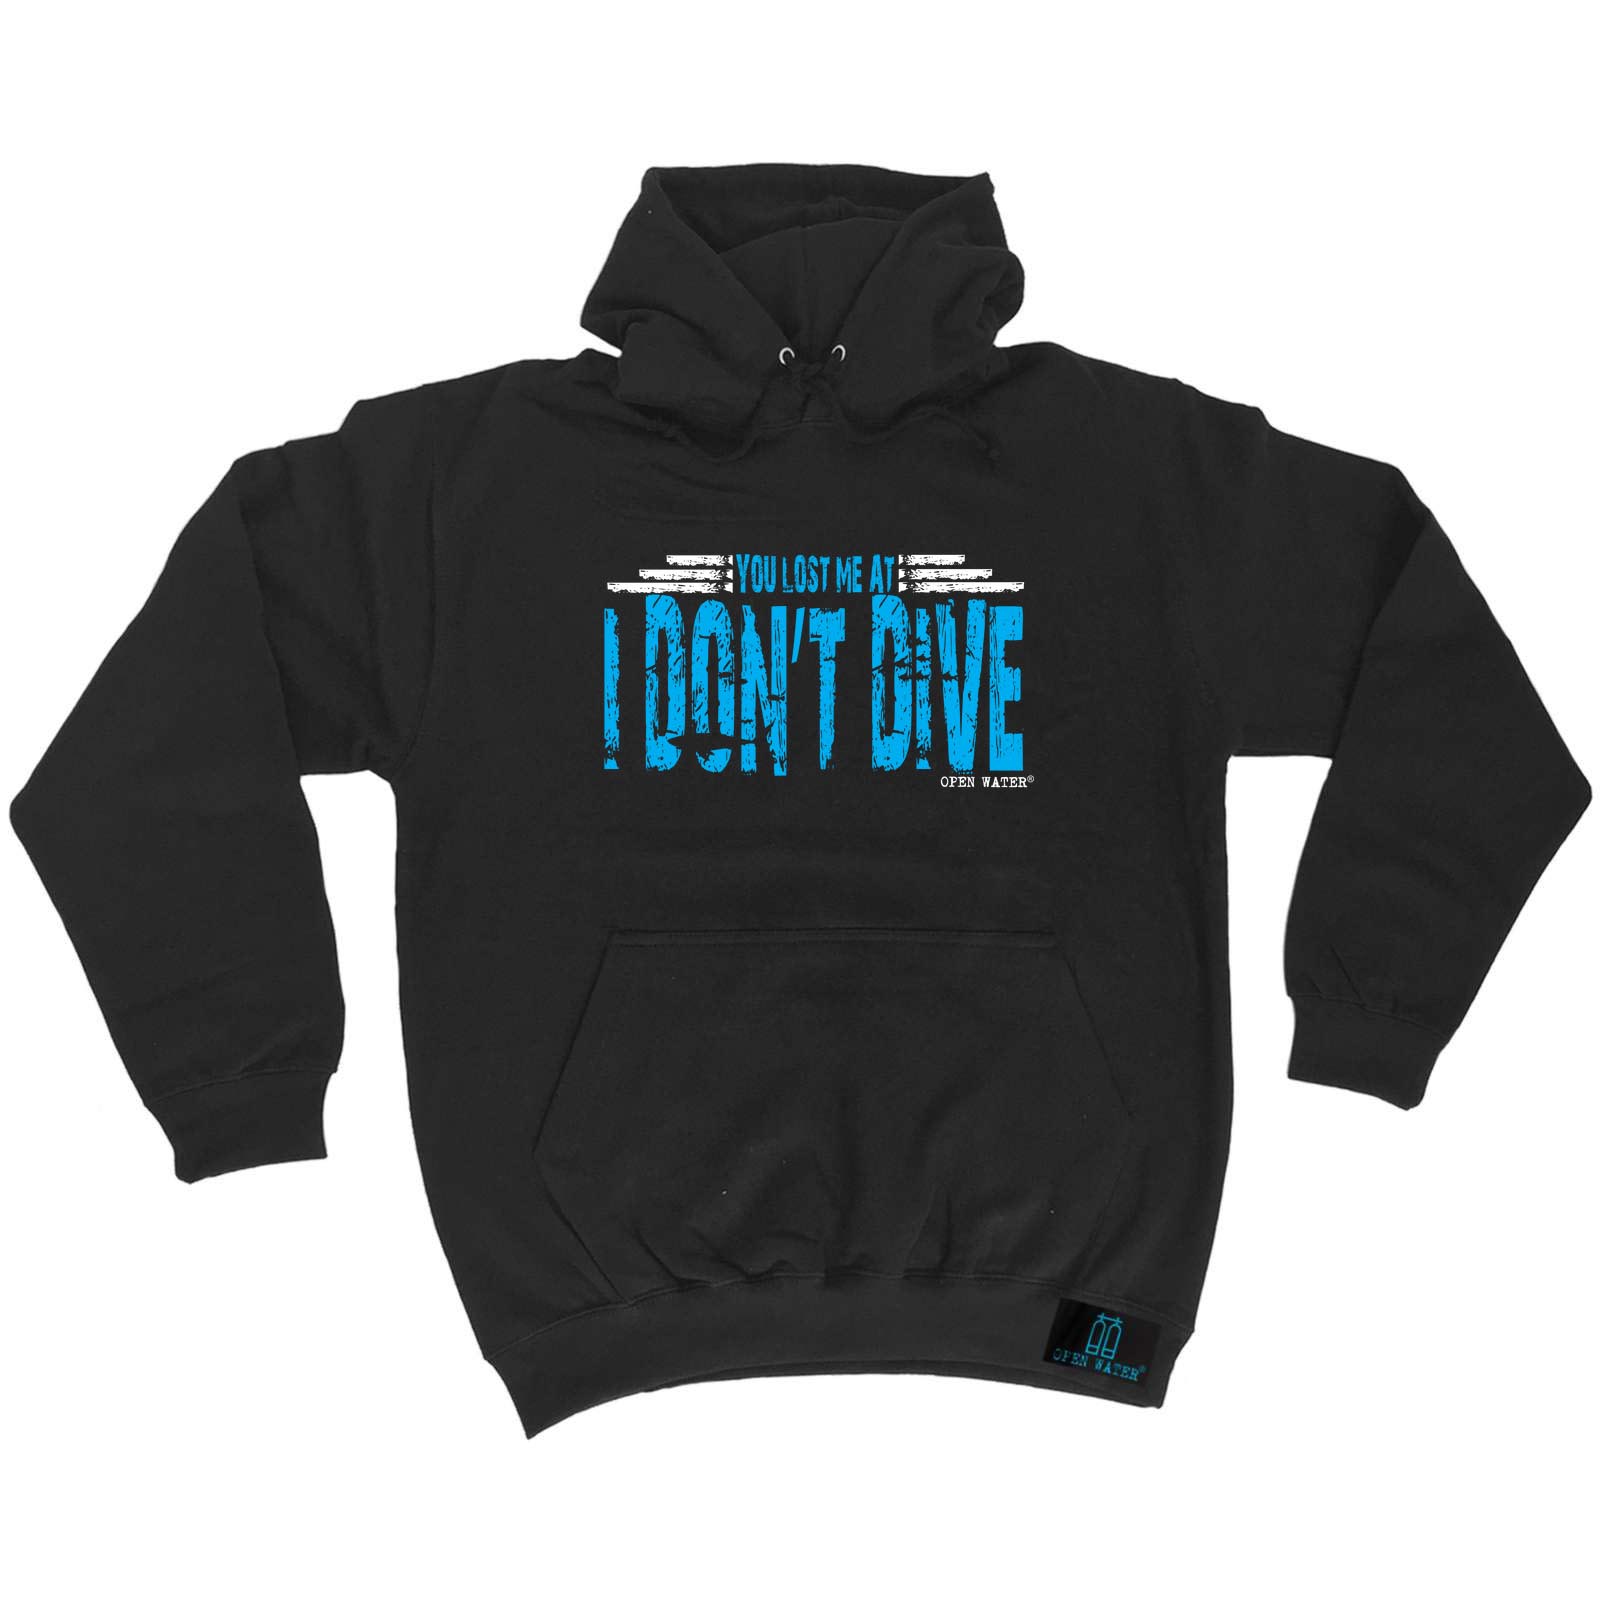 Scuba Diving Hoodie Hoody Funny Novelty hooded Top - You Lost Me At I ...